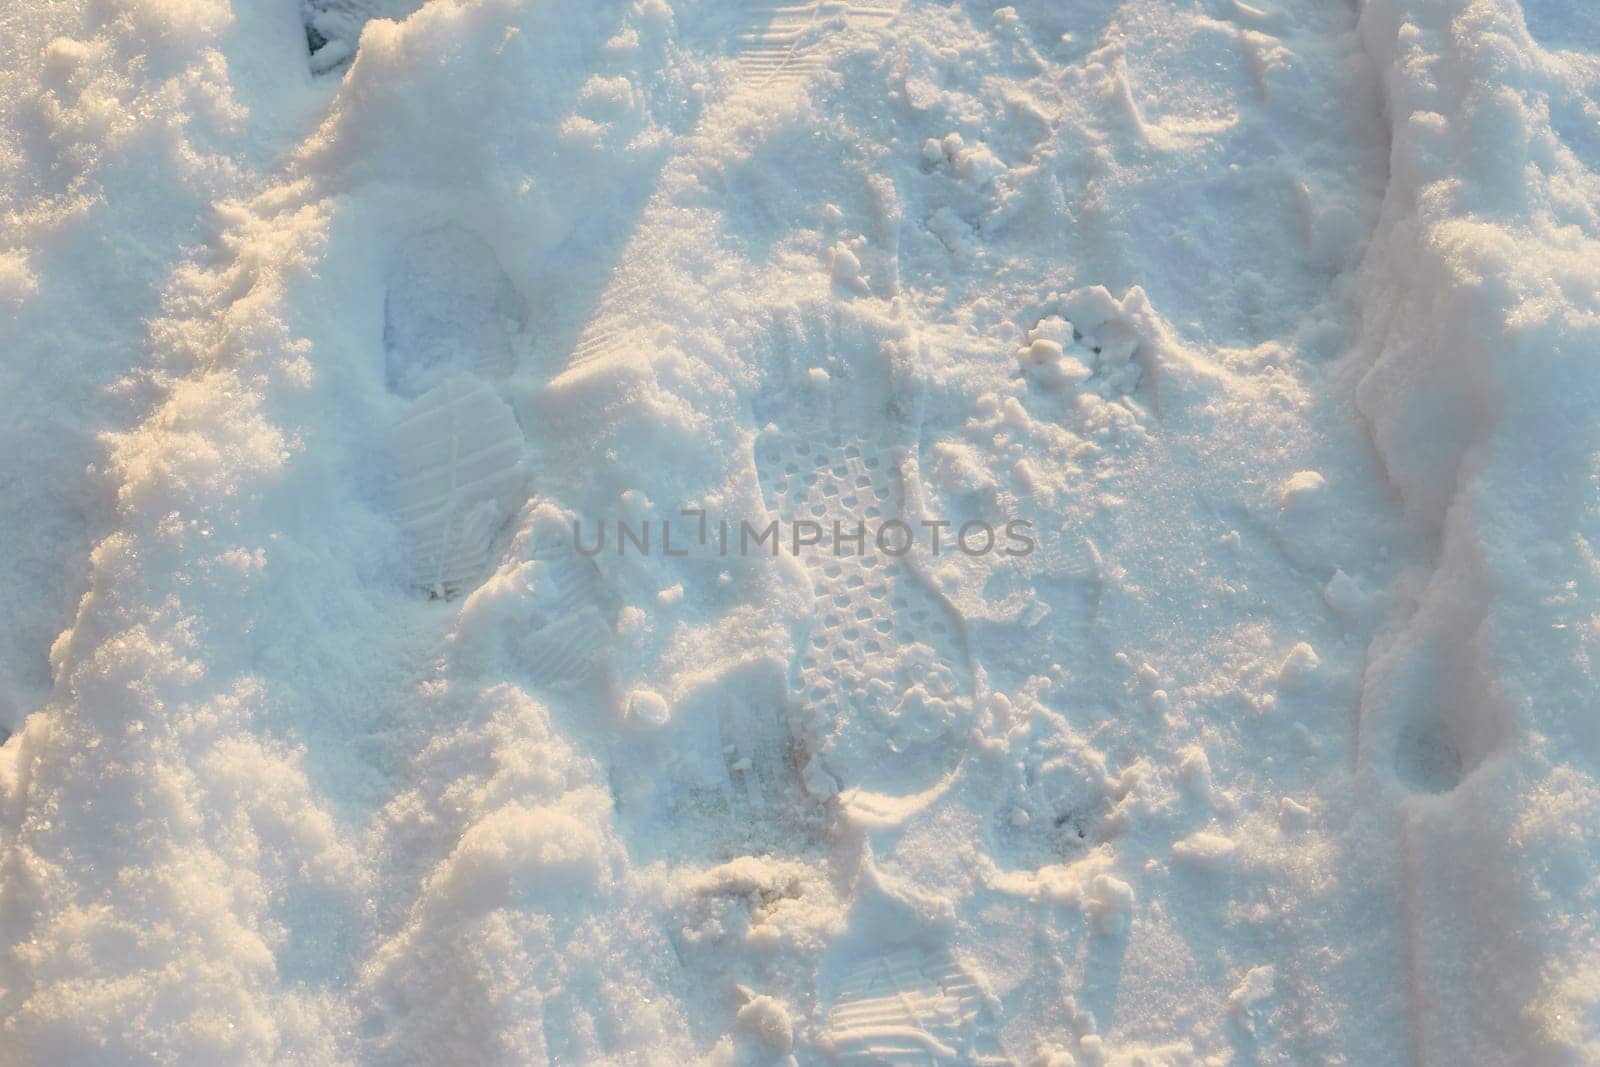 photo footprints from winter boots in the snow on a sunny frosty day. Prints.